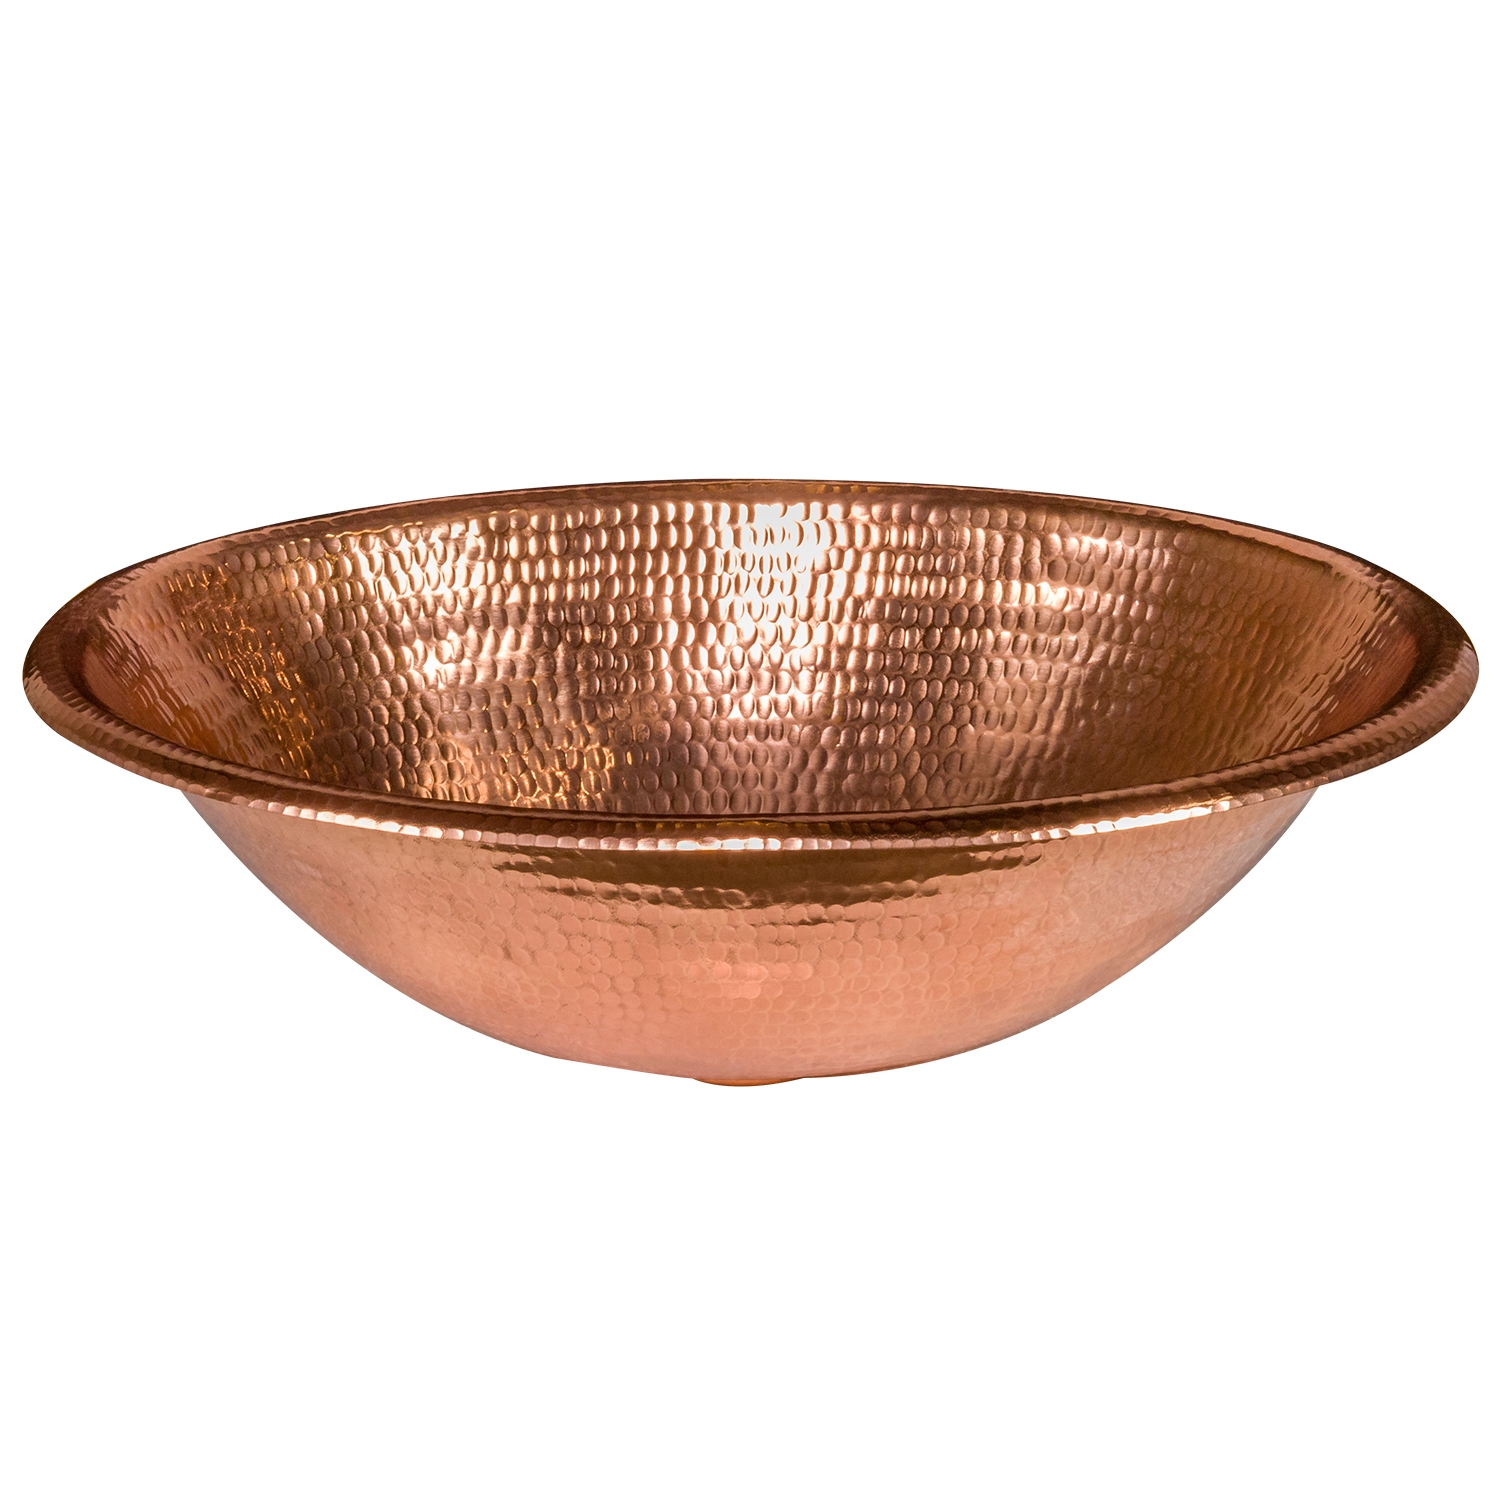 19" Oval Self Rimming Hammered Copper Bathroom Sink In Polished Copper